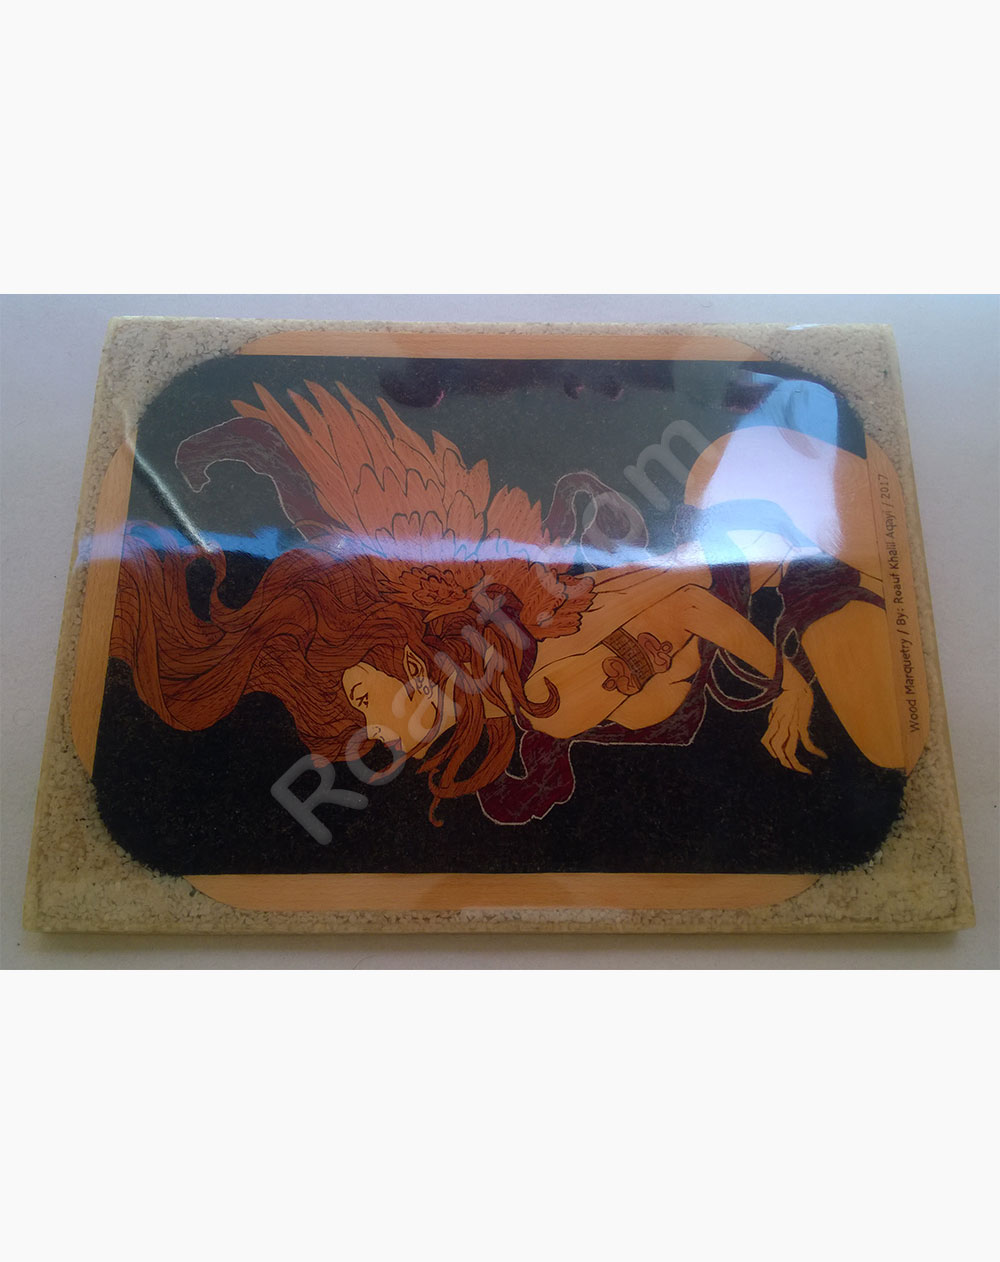 Wood Inlay, Wood Marquetry Panel of a Naked Angel